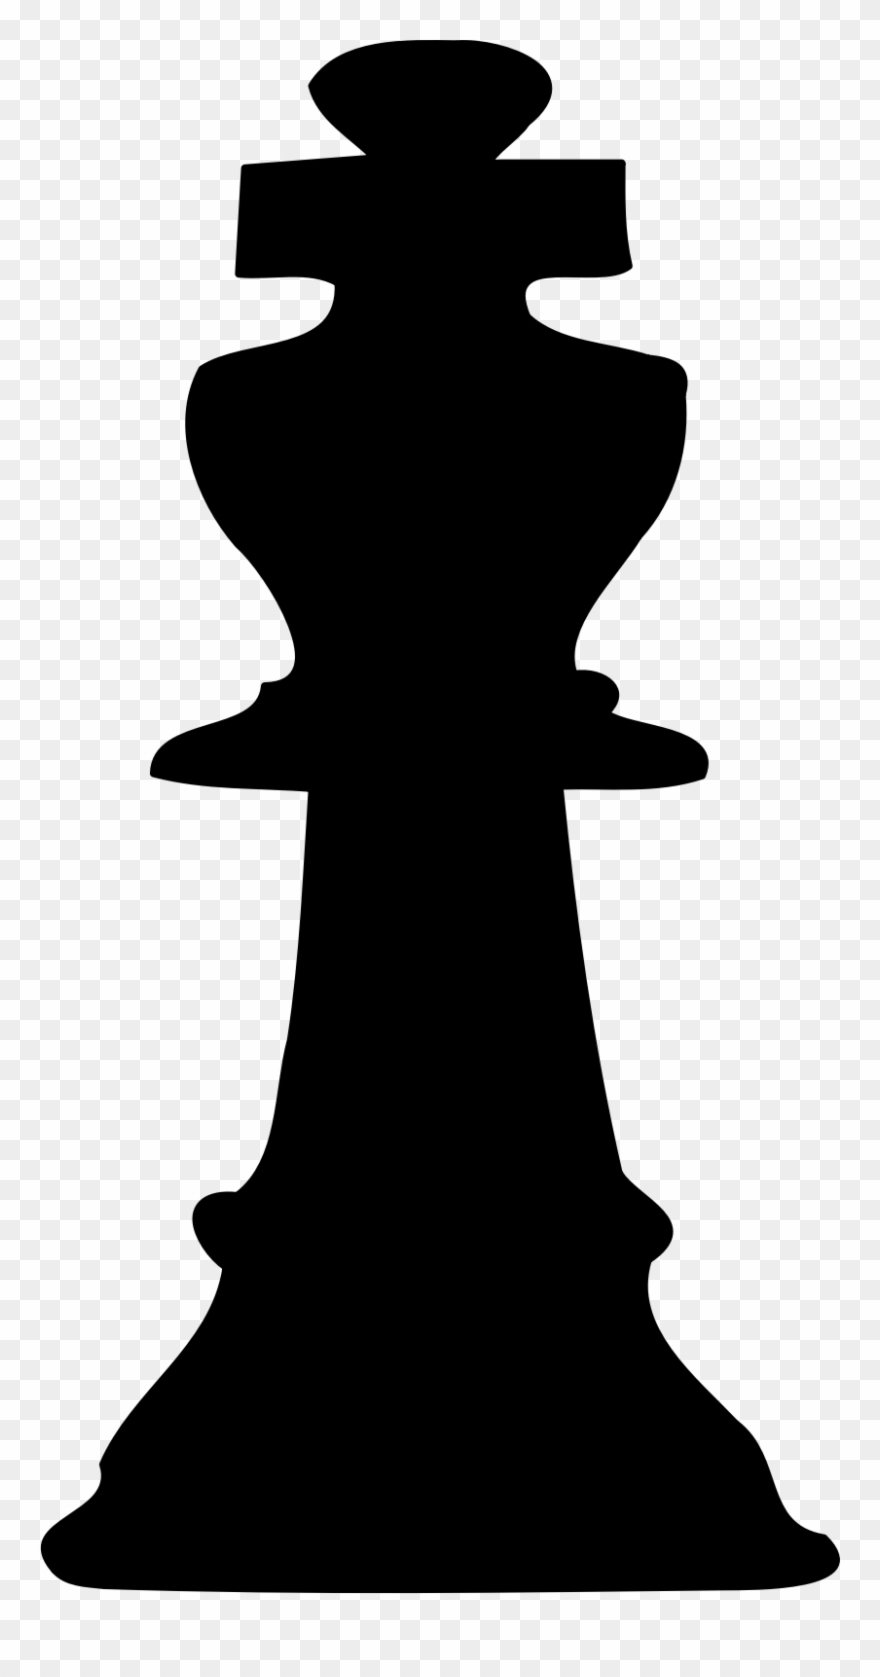 Chess clipart silhouette, Chess silhouette Transparent FREE for ...